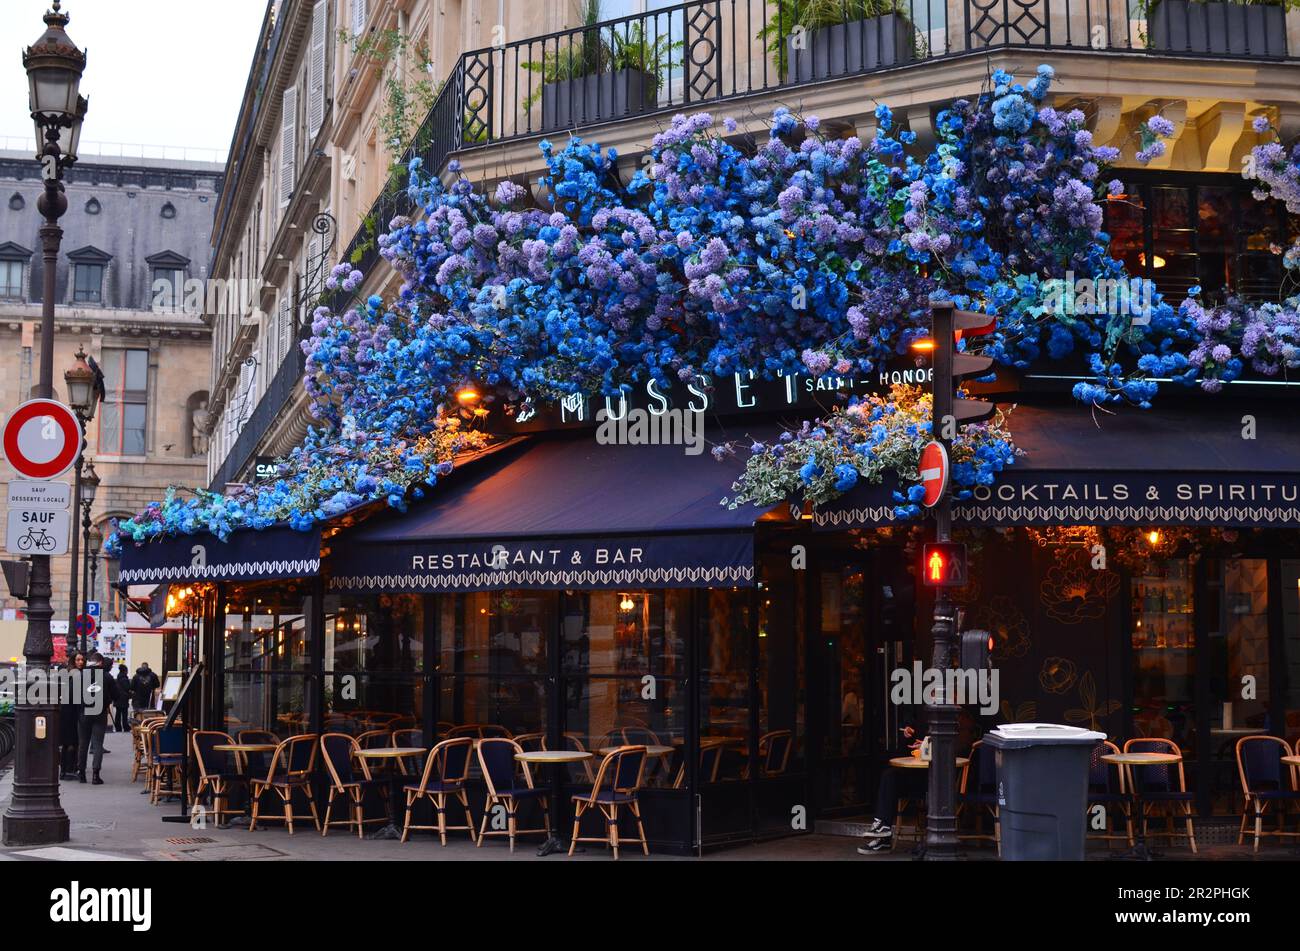 Paris, France - December 10, 2022: Exterior of Le Musset restaurant decorated with beautiful blue hydrangea flowers Stock Photo